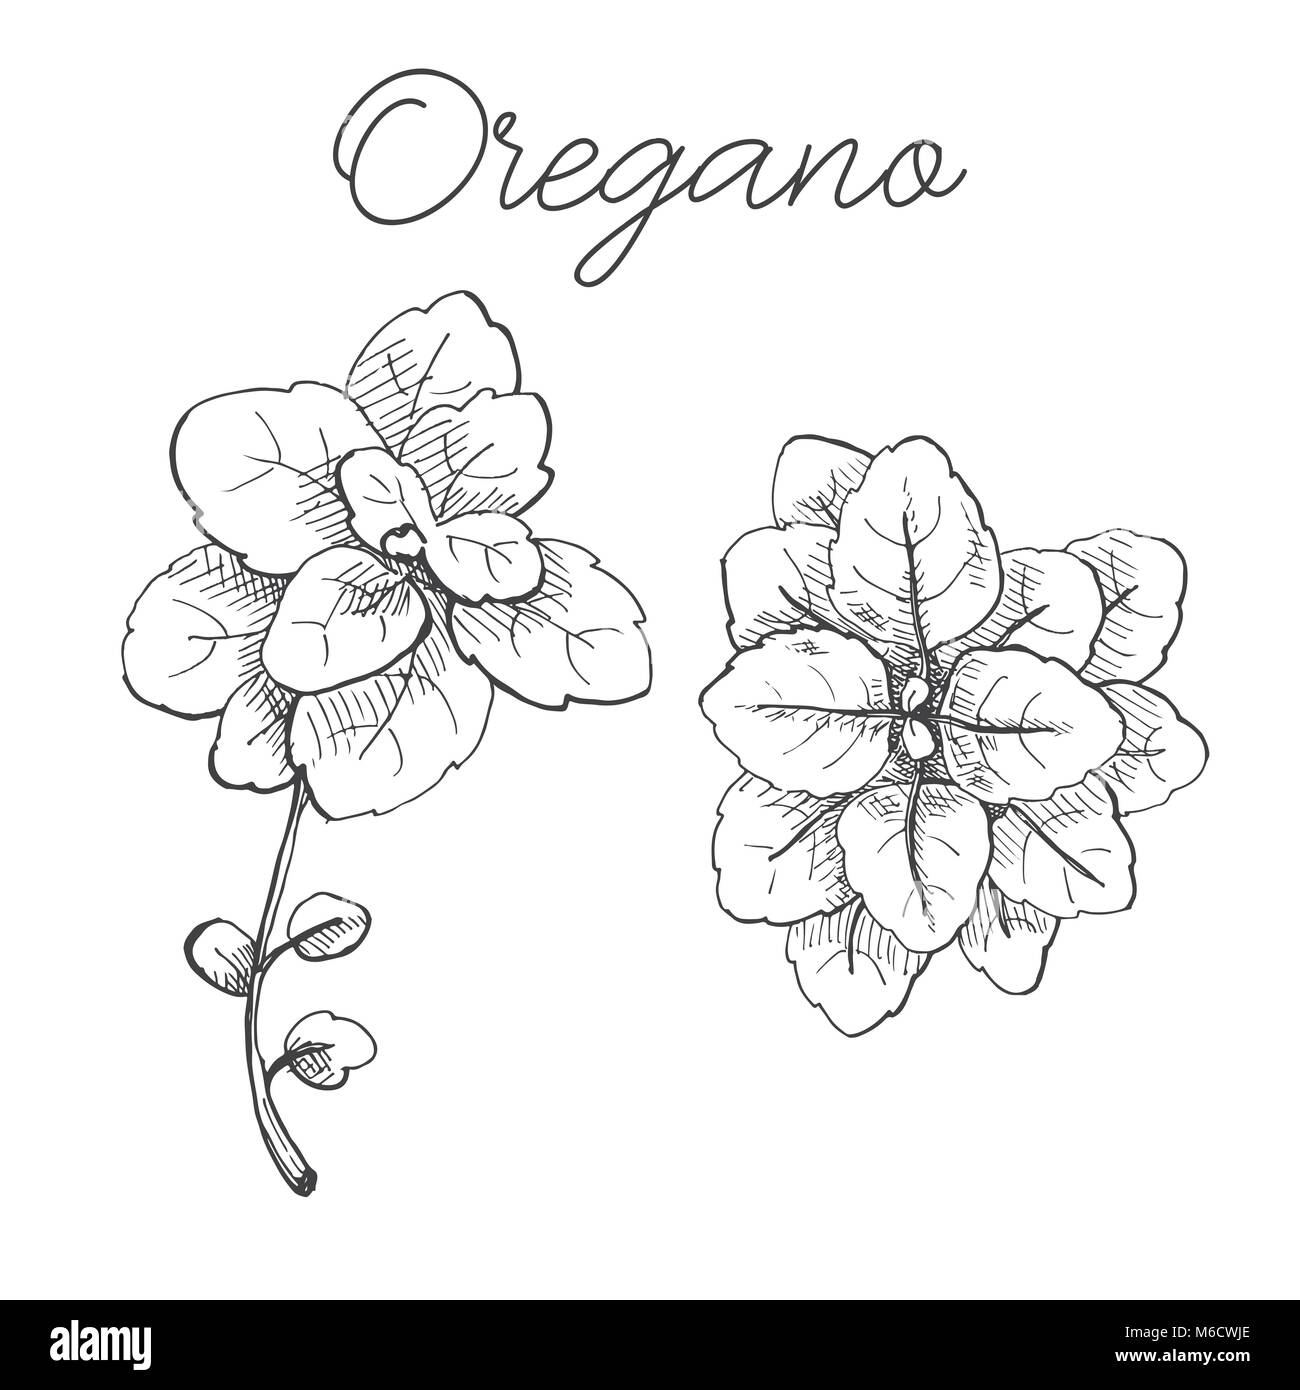 Hand drawn bunch of oregano. Fresh oregano isolated on white background. Vector illustration of a sketch style. Stock Vector